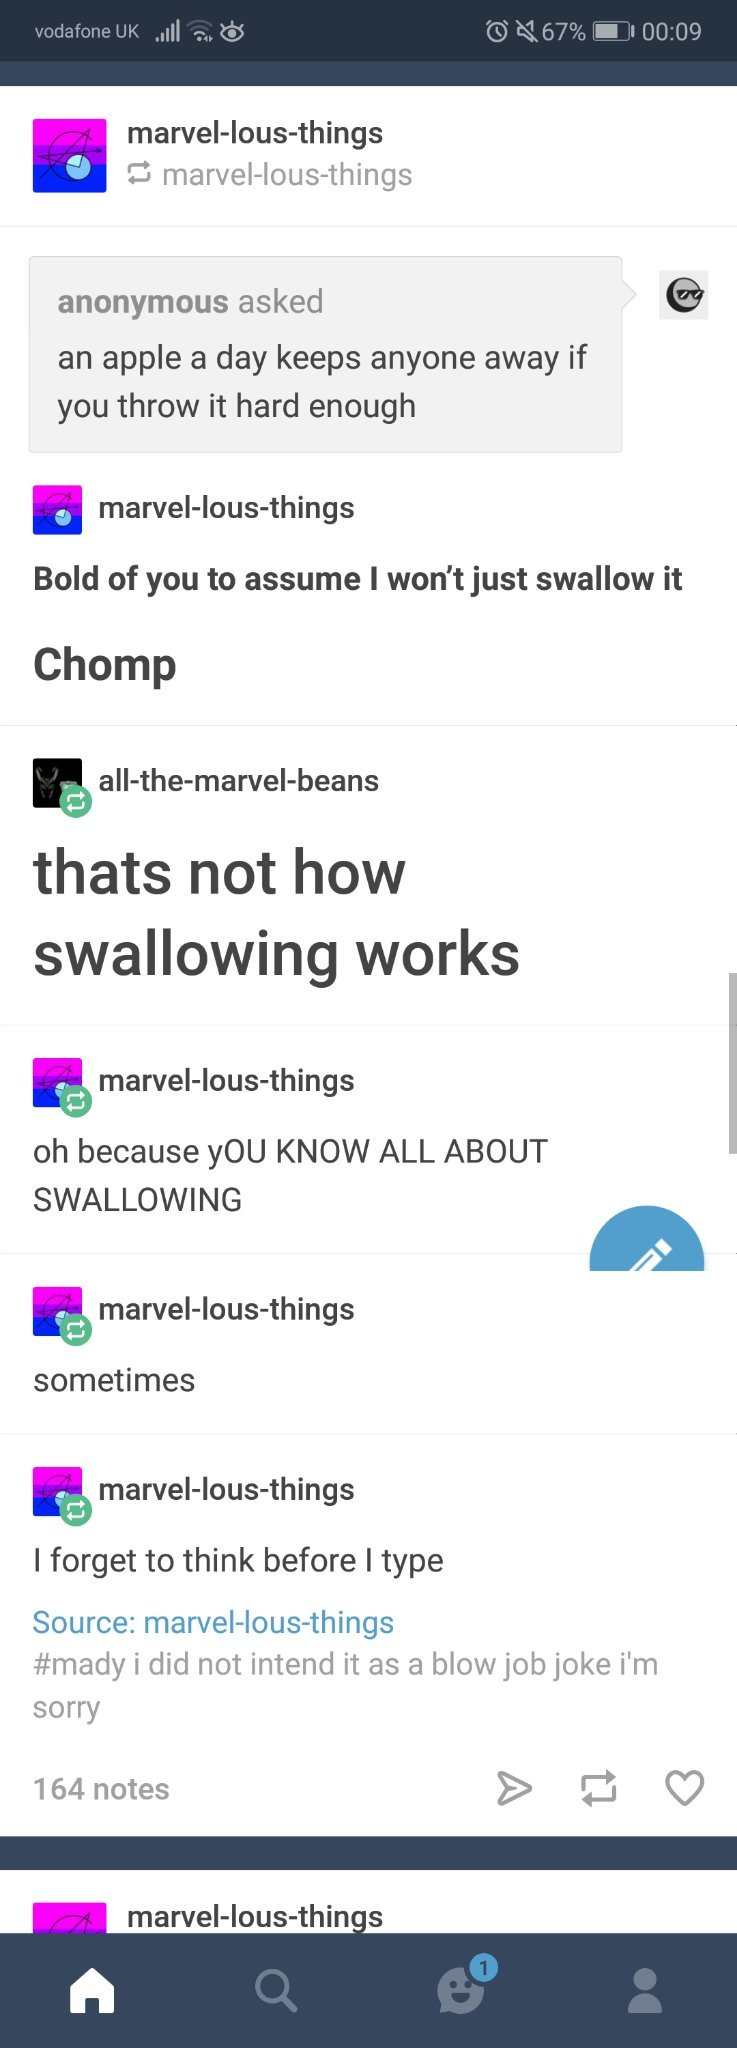 Swallowing works hOW I SAY IT WORKS - meme